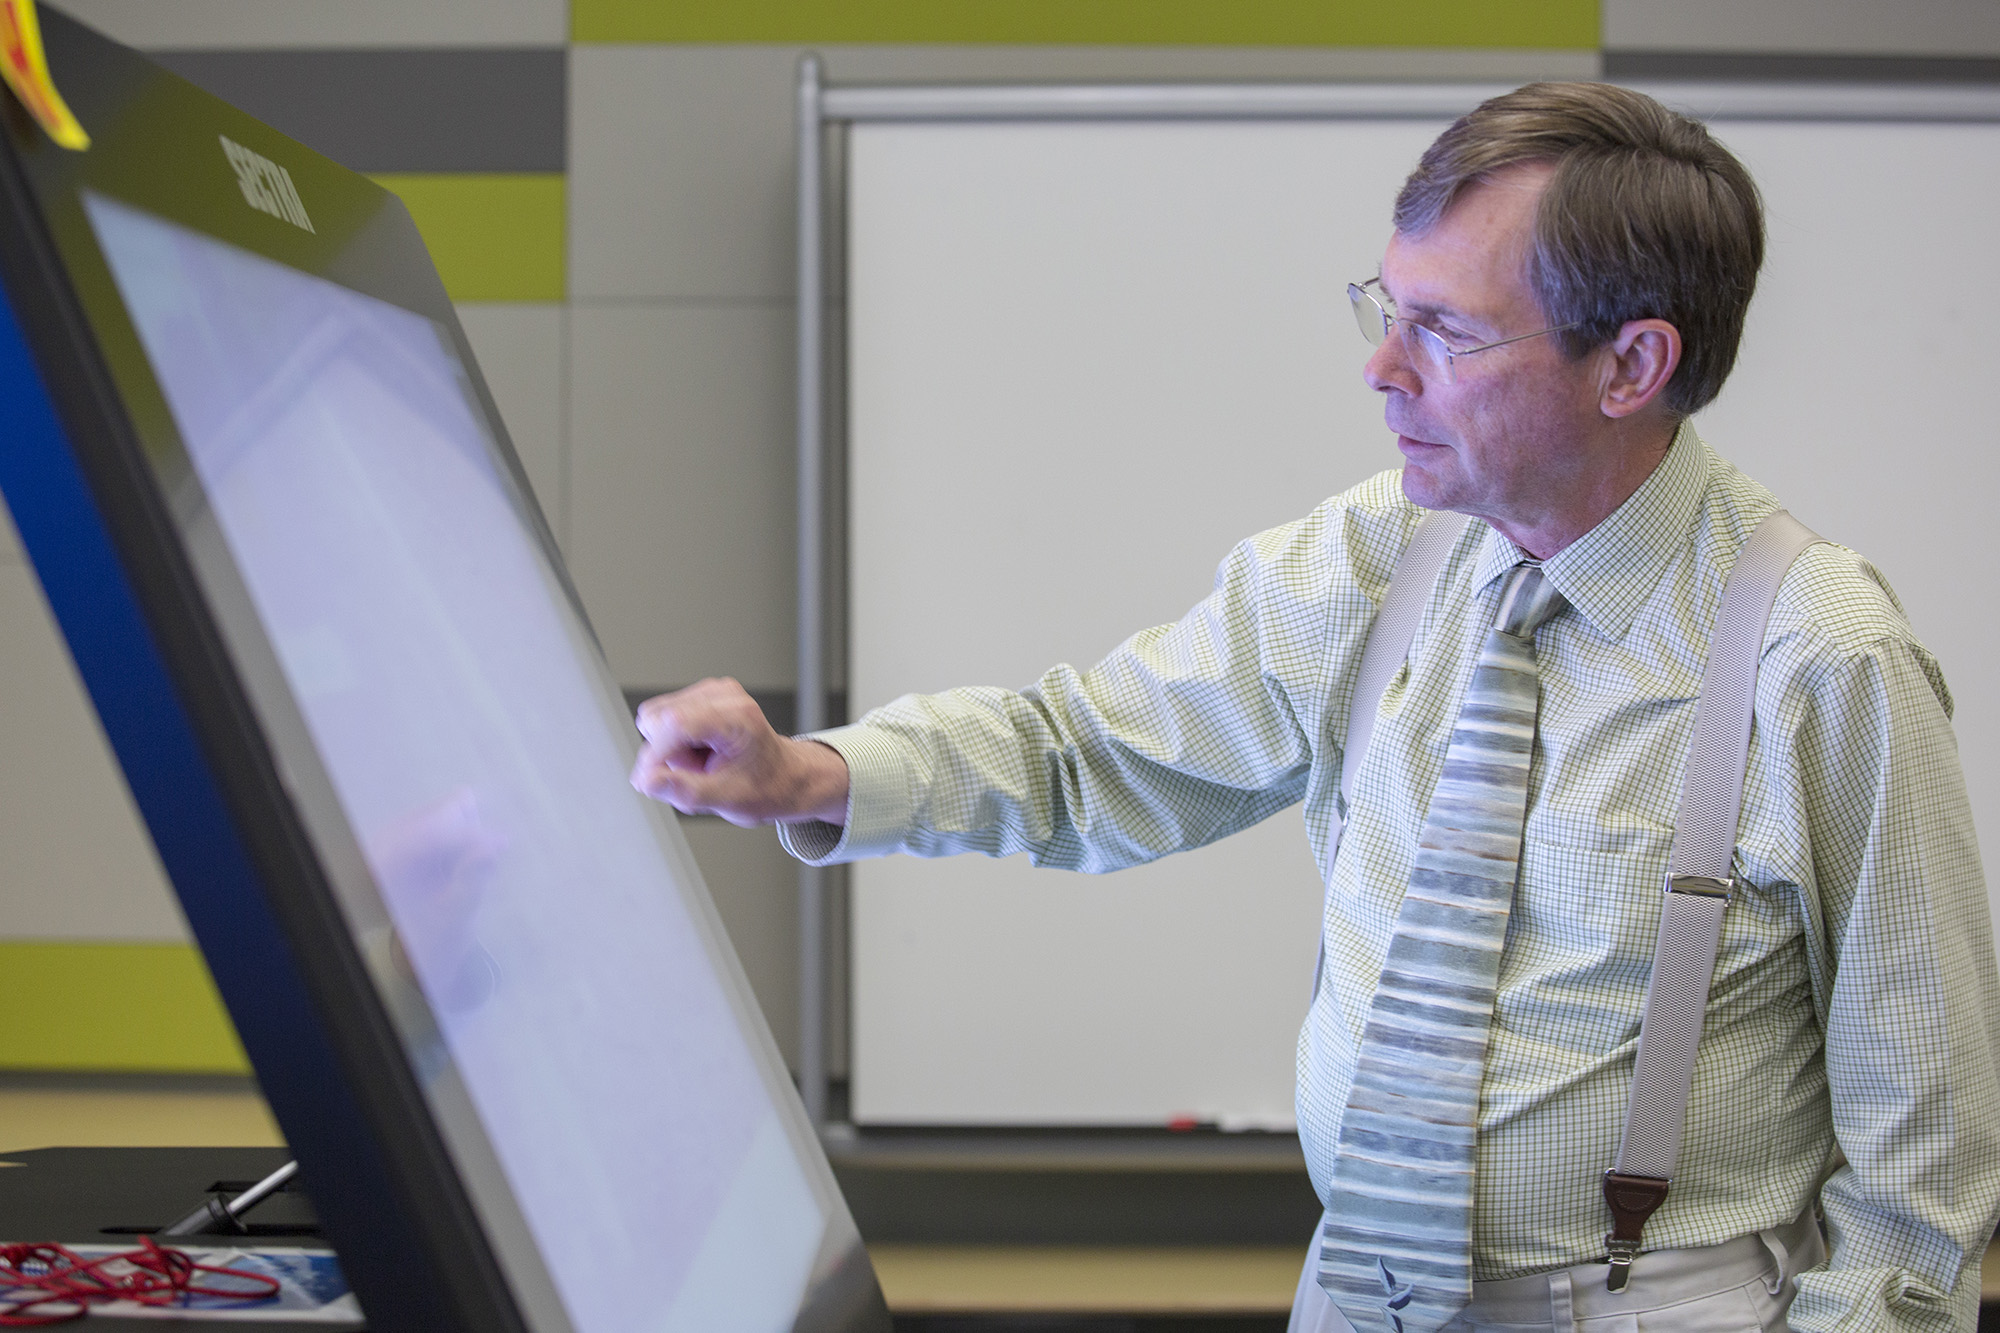 An instructor reaches a hand out towards a large touchscreen monitor.